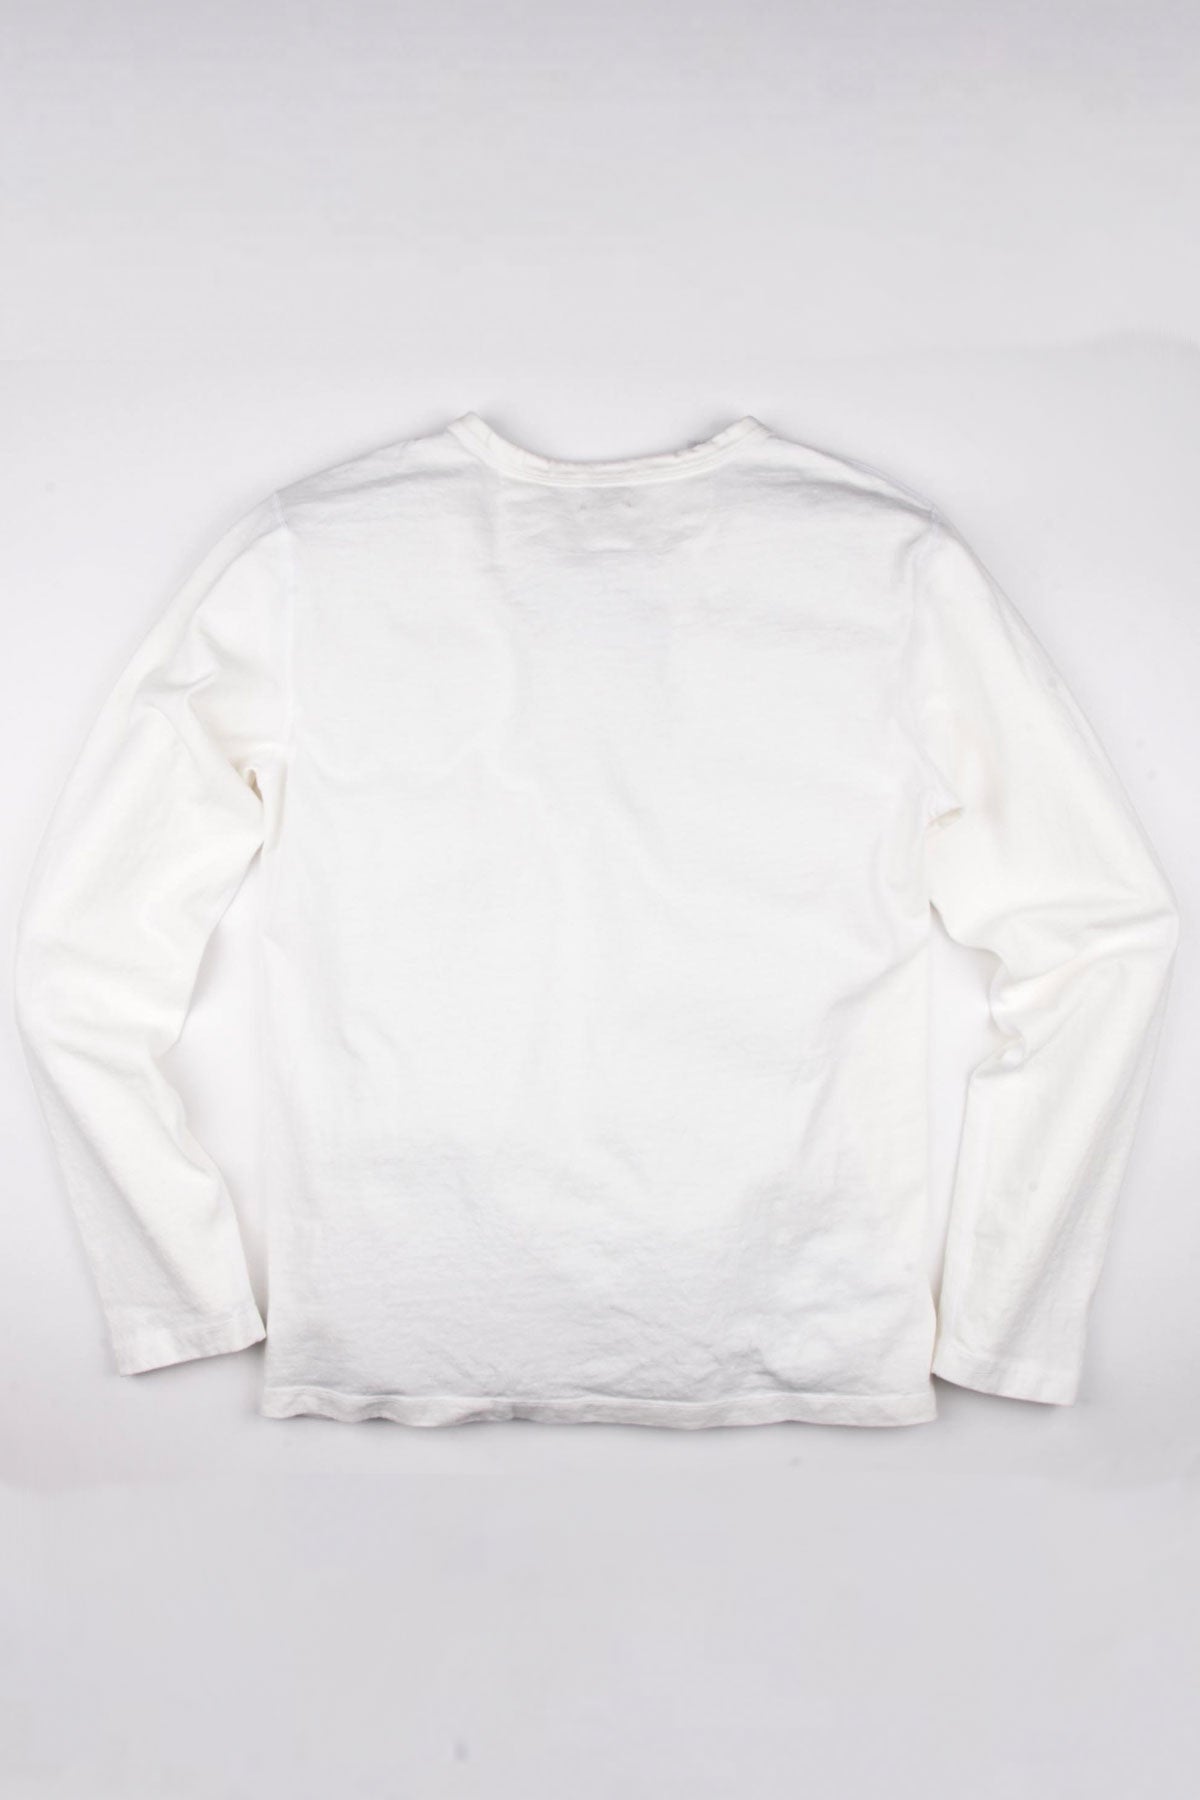 Freenote Cloth 13 Ounce Henley - L/S White – The Rugged Society